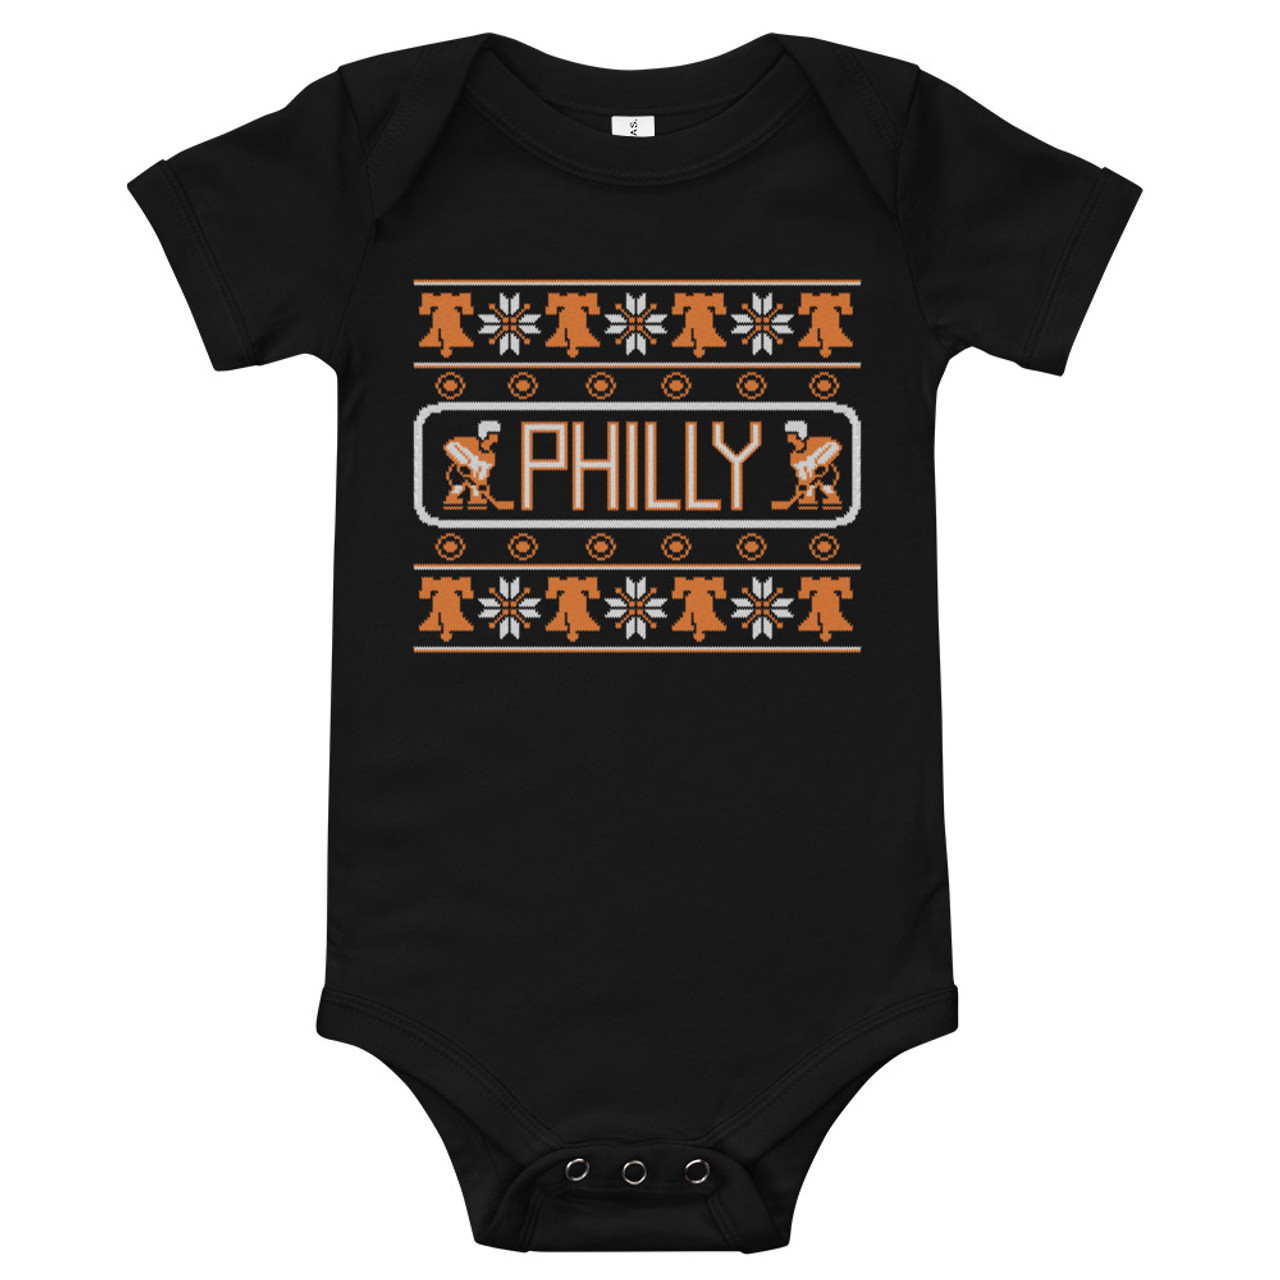 My Daddy and I are Detroit fans baby bodysuit hockey infant one piece